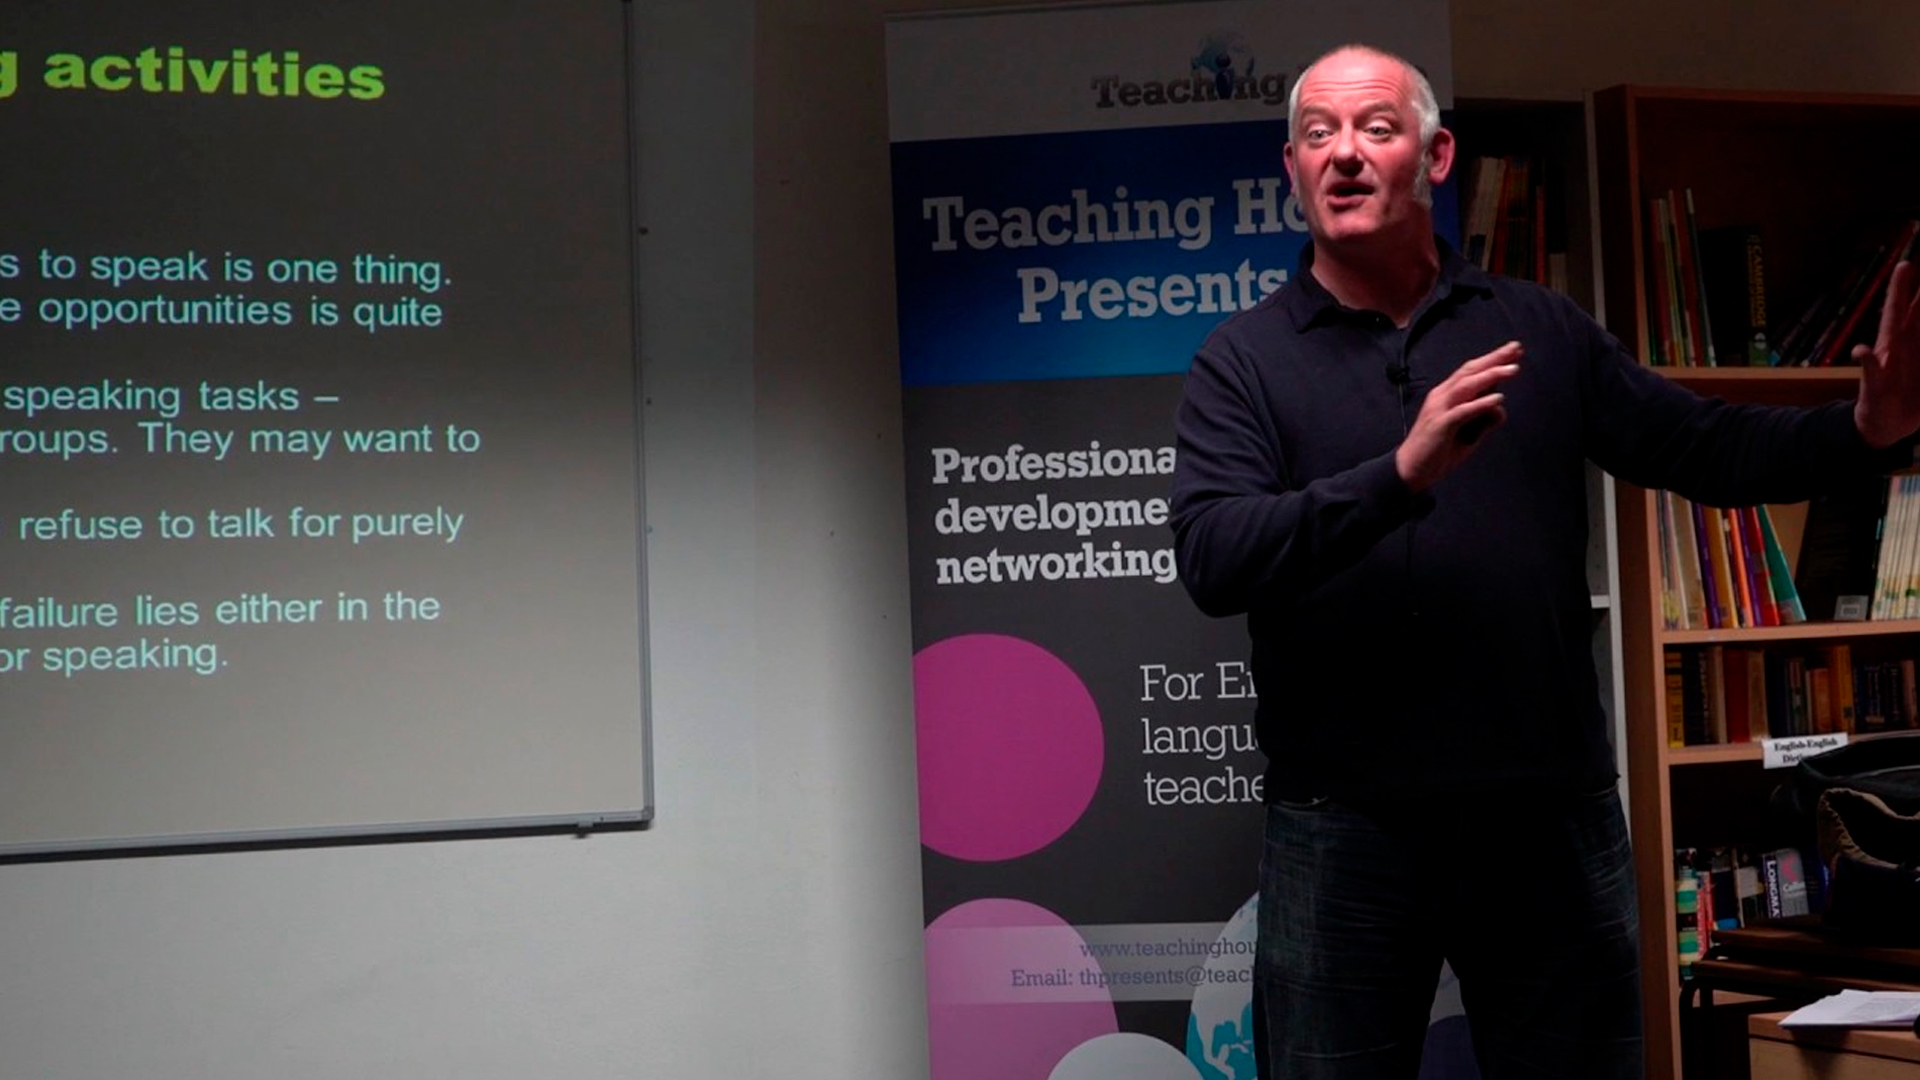 Hugh Dellar talks about the focus of language education in the 21st century